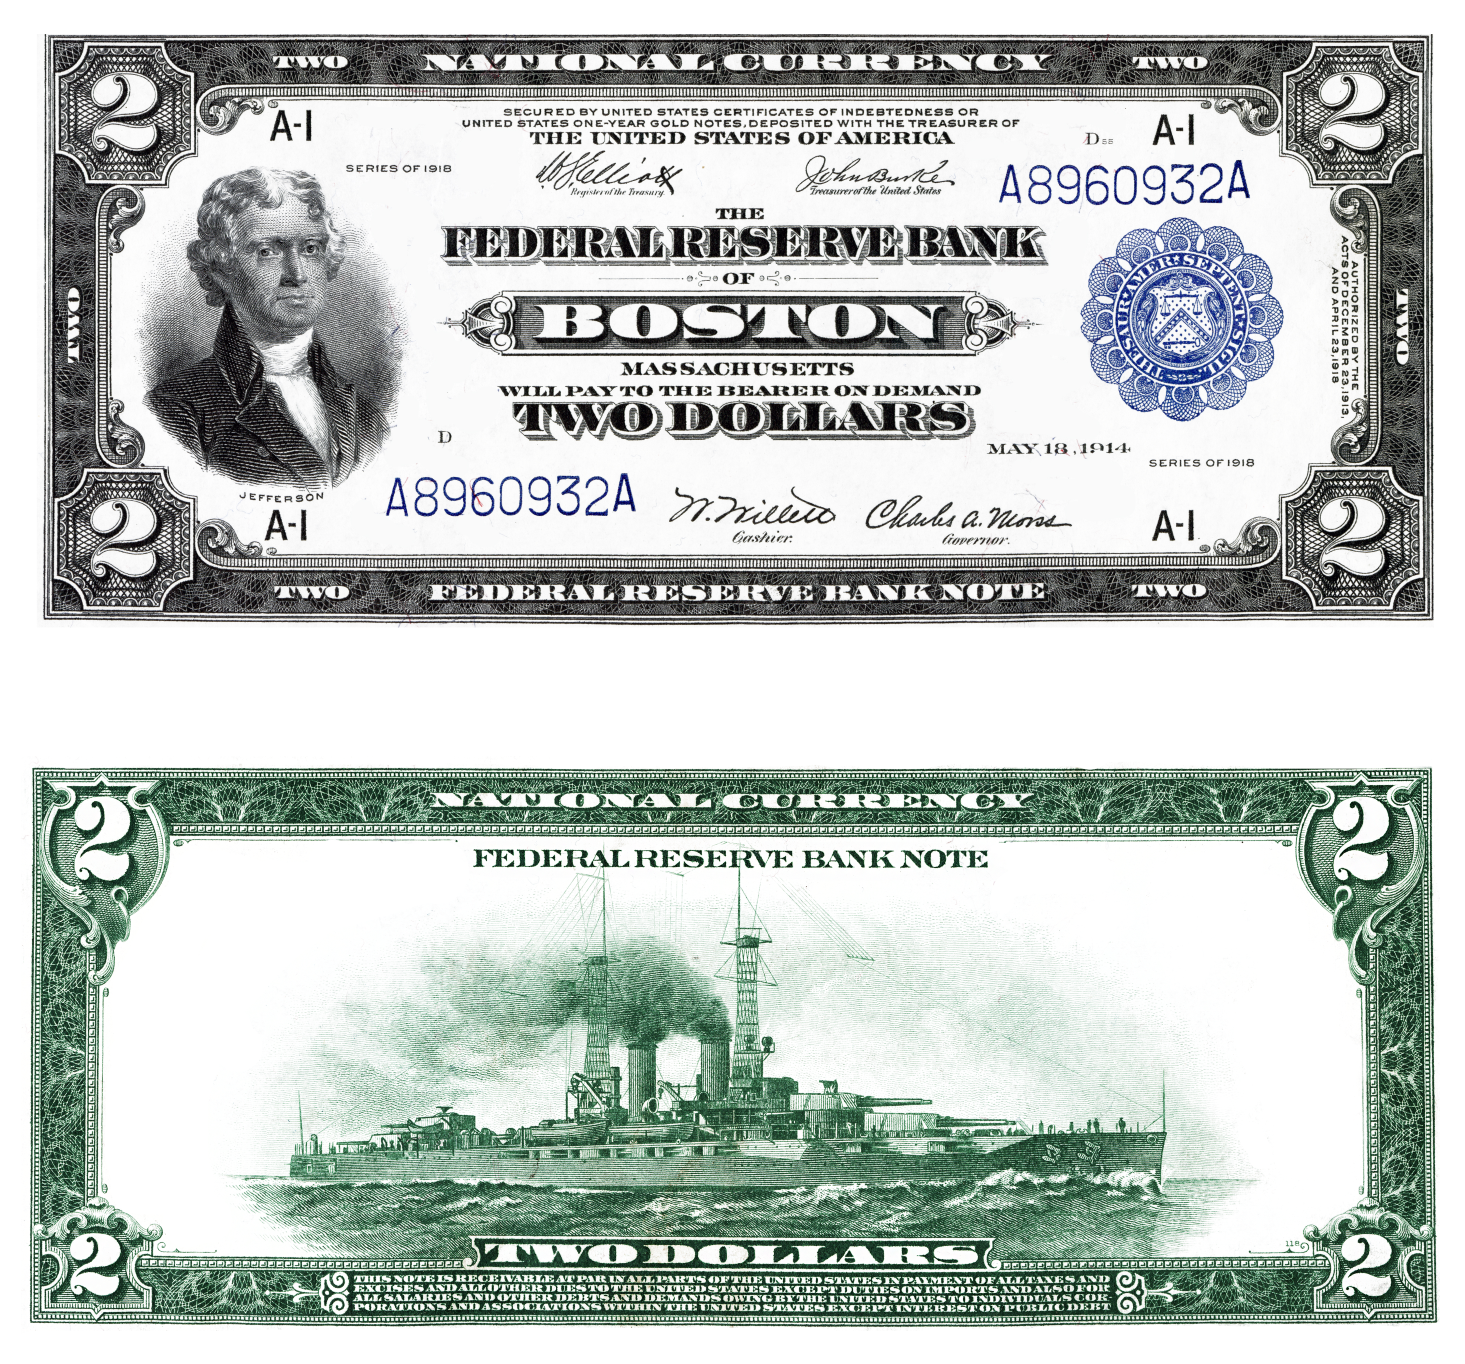 Reproduction of two 1918 notes: Battleship $2 & Flying Eagle $1 Fed Res Bank Not